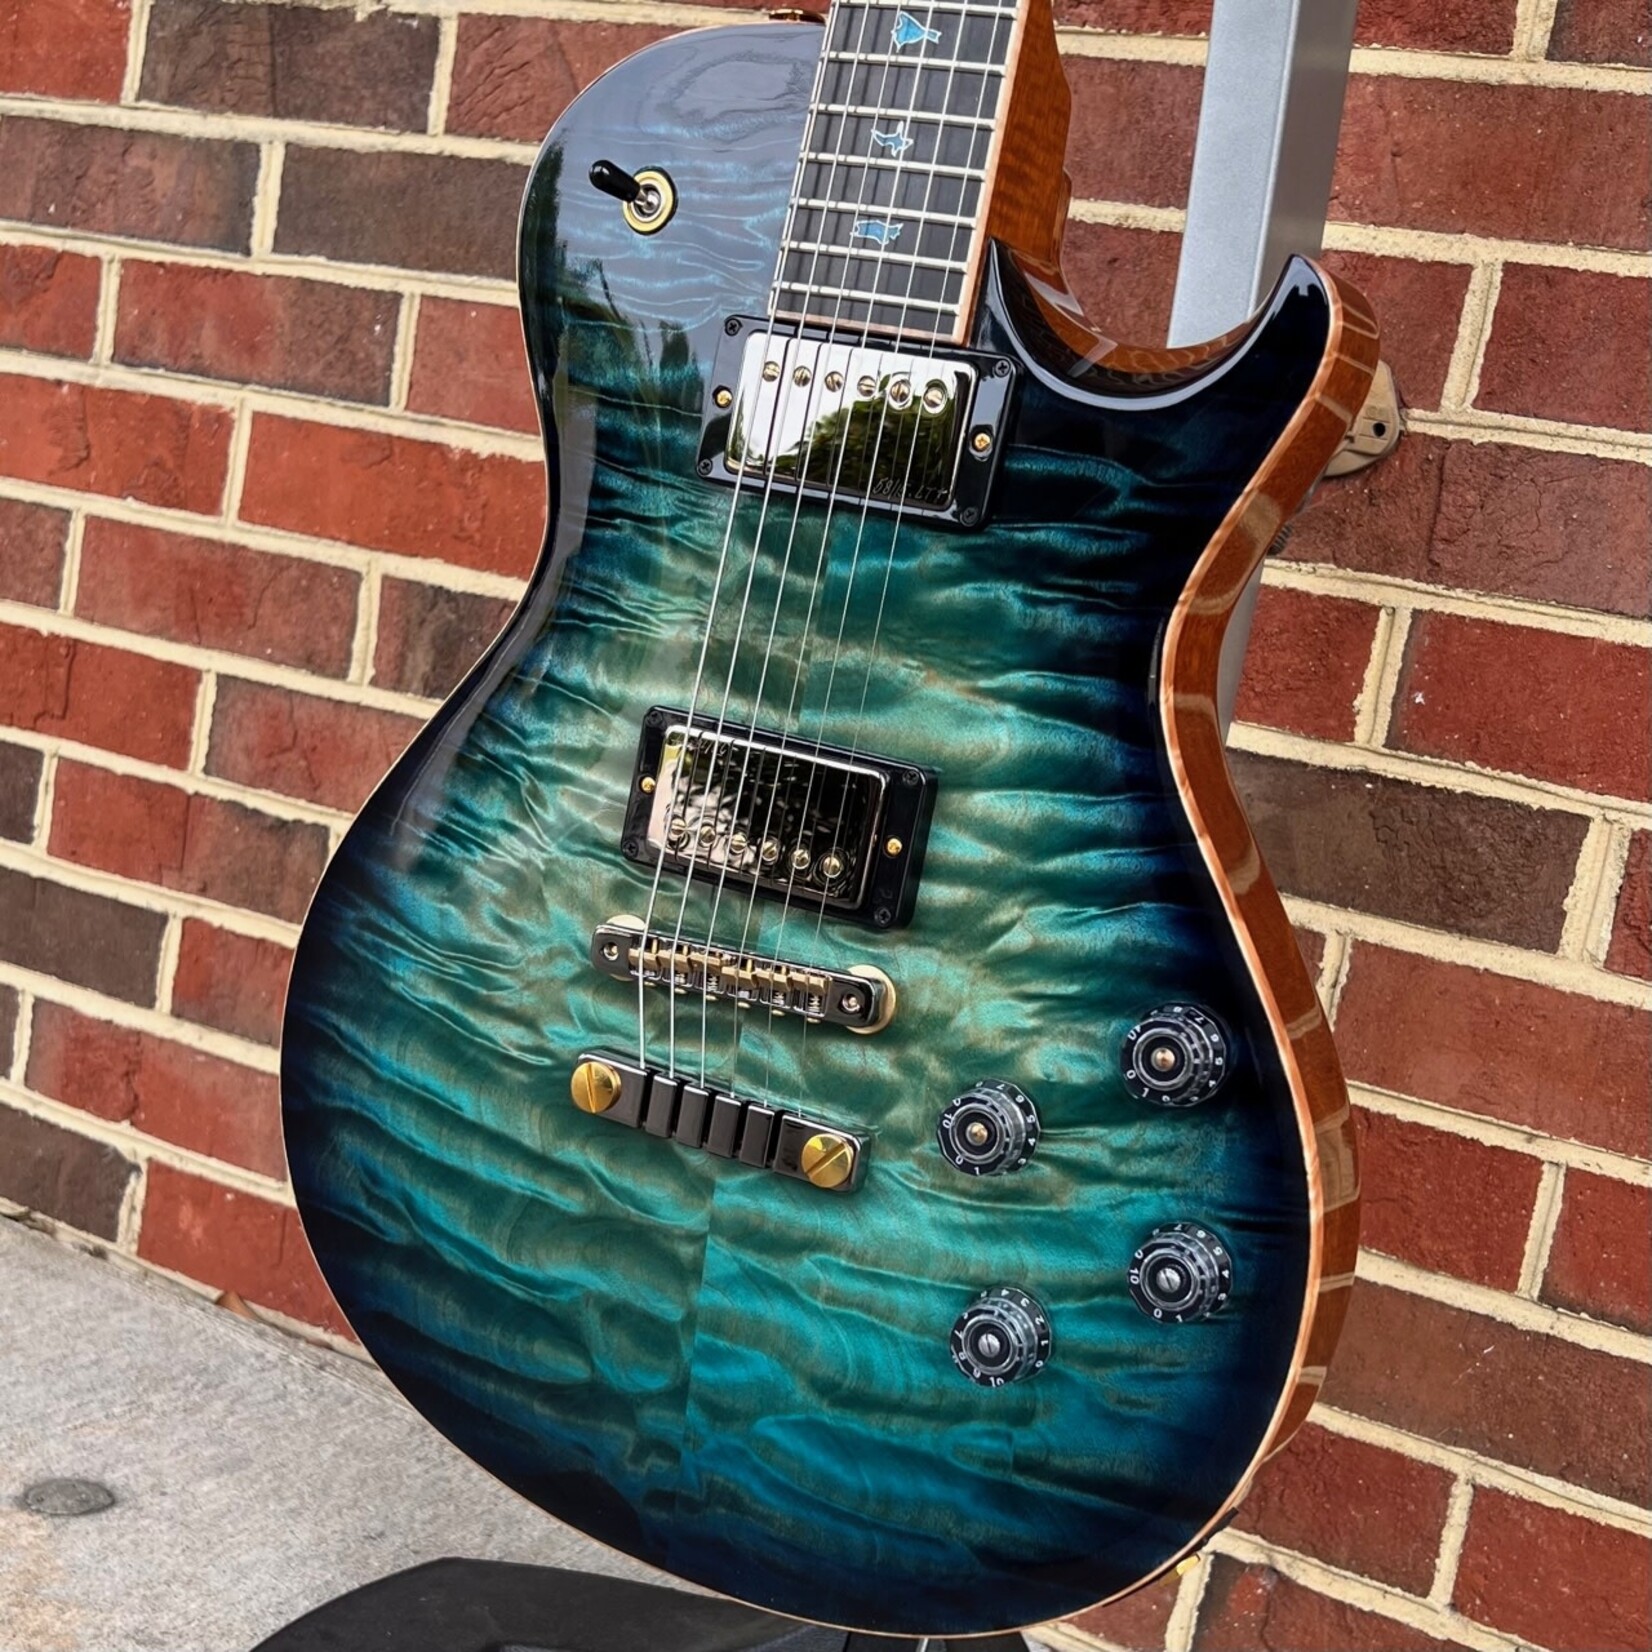 Paul Reed Smith Paul Reed Smith Private Stock McCarty 594 Singlecut, Sub Zero Glow Smokeburst, Quilted Maple Top, Figured Mahogany Body, Figured Mahogany Neck, Ebony Fretboard, Stained Curly Maple Bird Inlays with Sparkle Mother of Pearl Outlines, Smoked Black Hardware